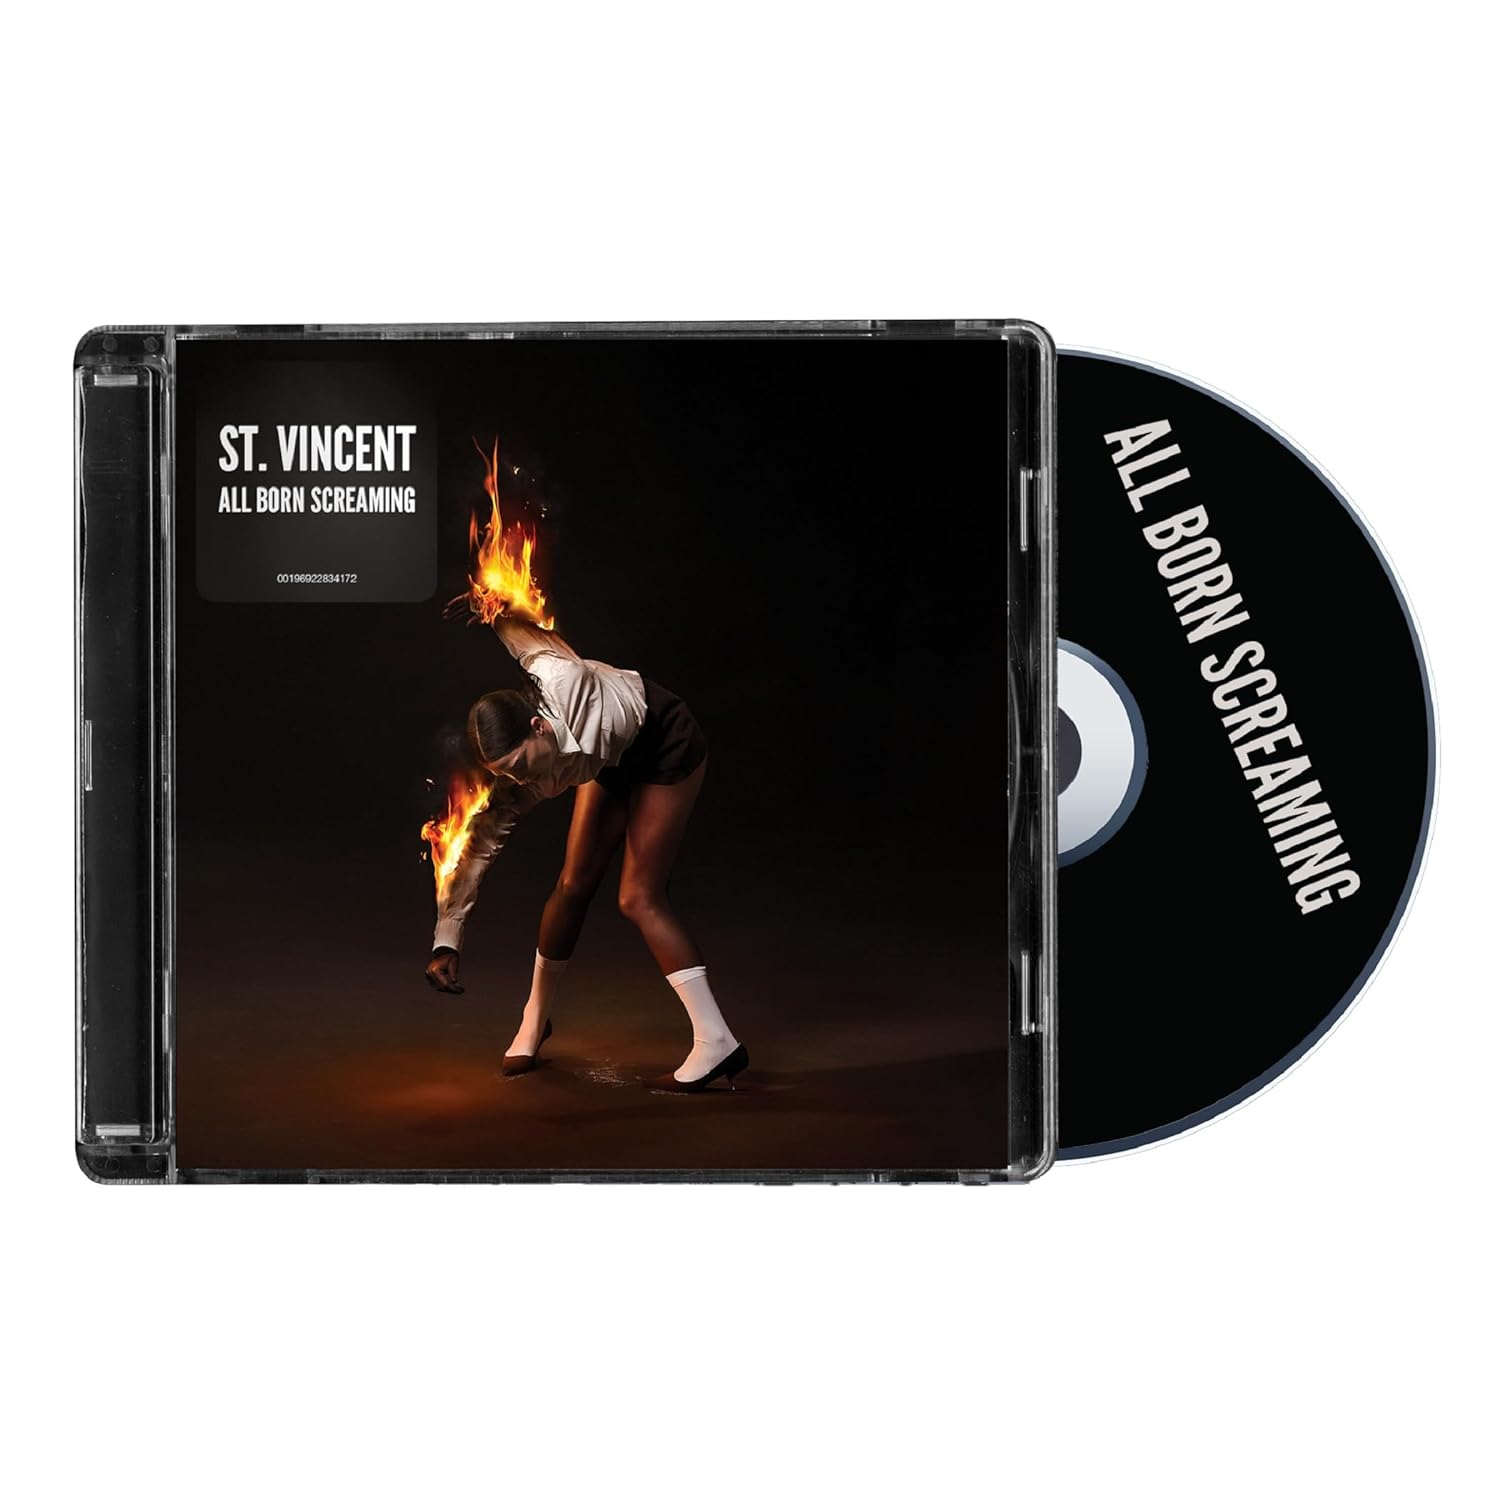 ST. VINCENT – ALL BORN SCREAMING CD